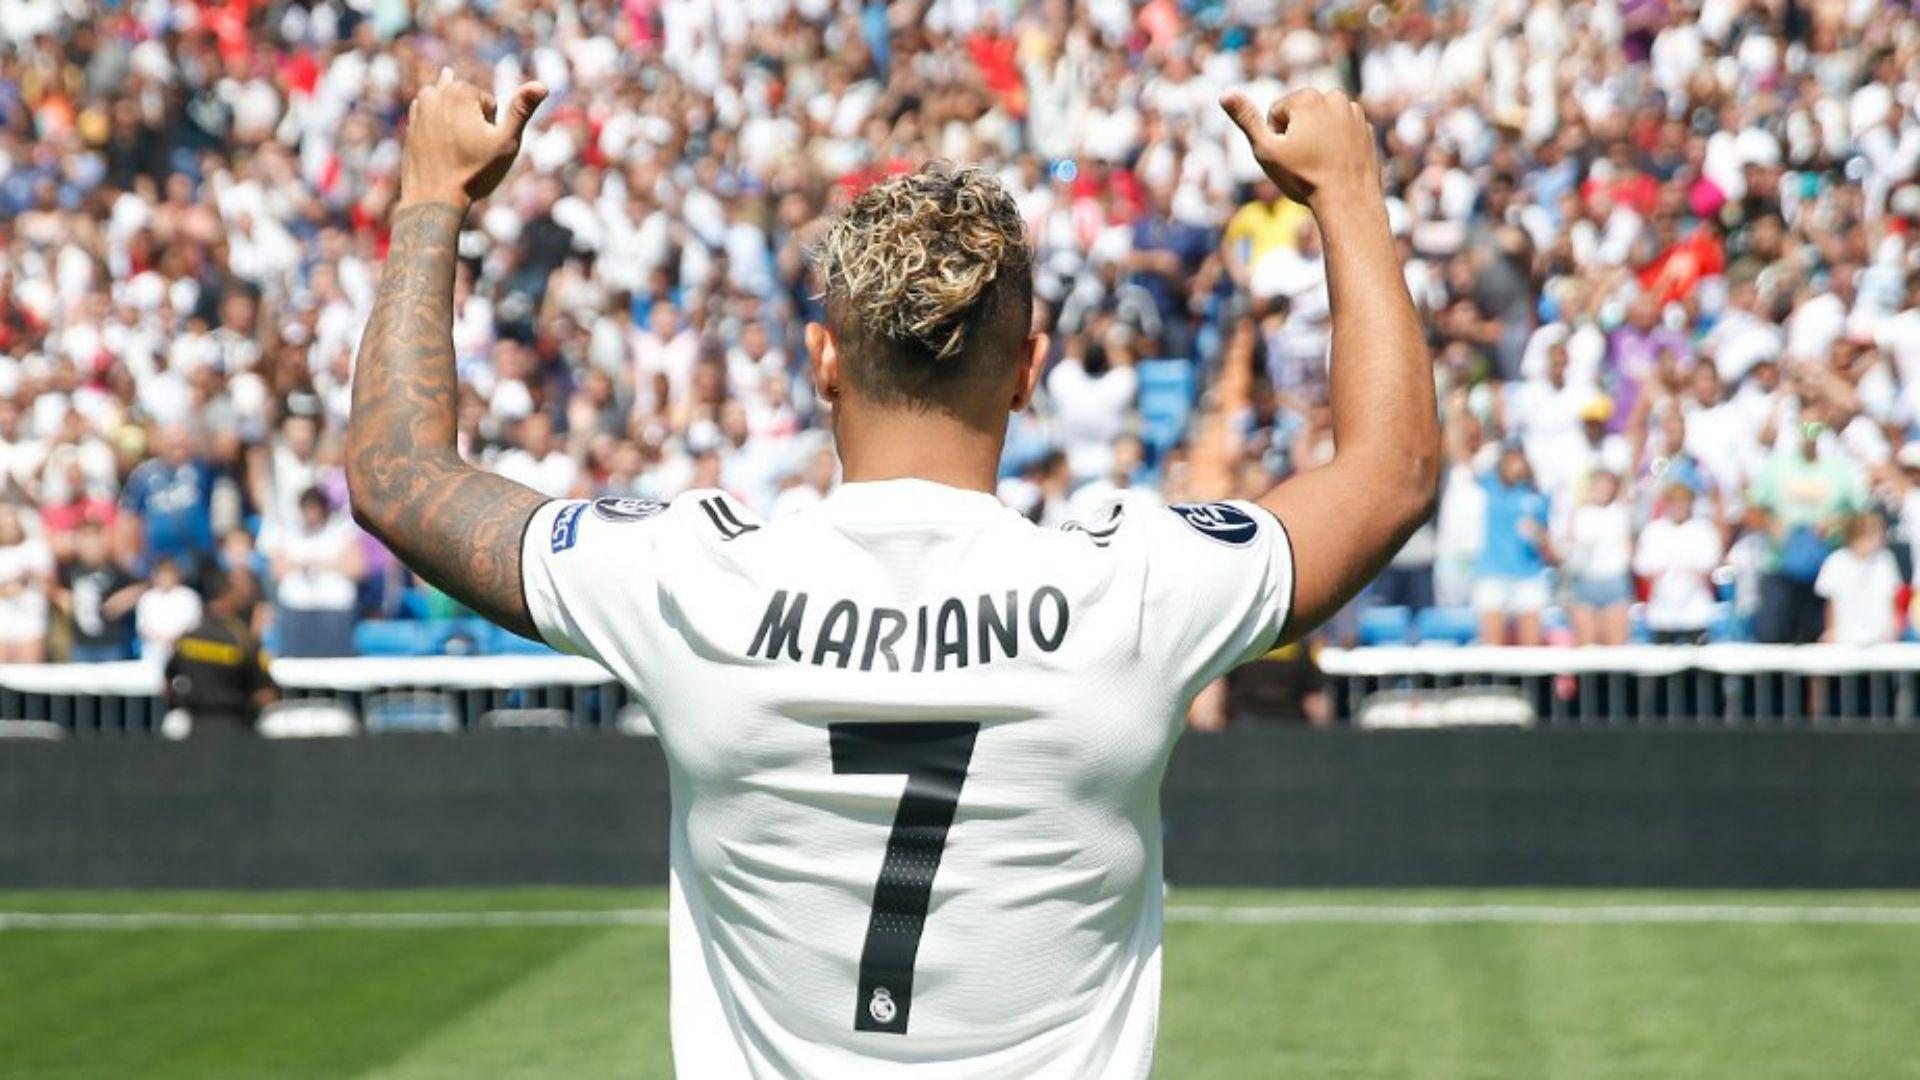 Mariano Diaz Excited To Wear Ronaldo's 7 For Real Madrid. LA LIGA